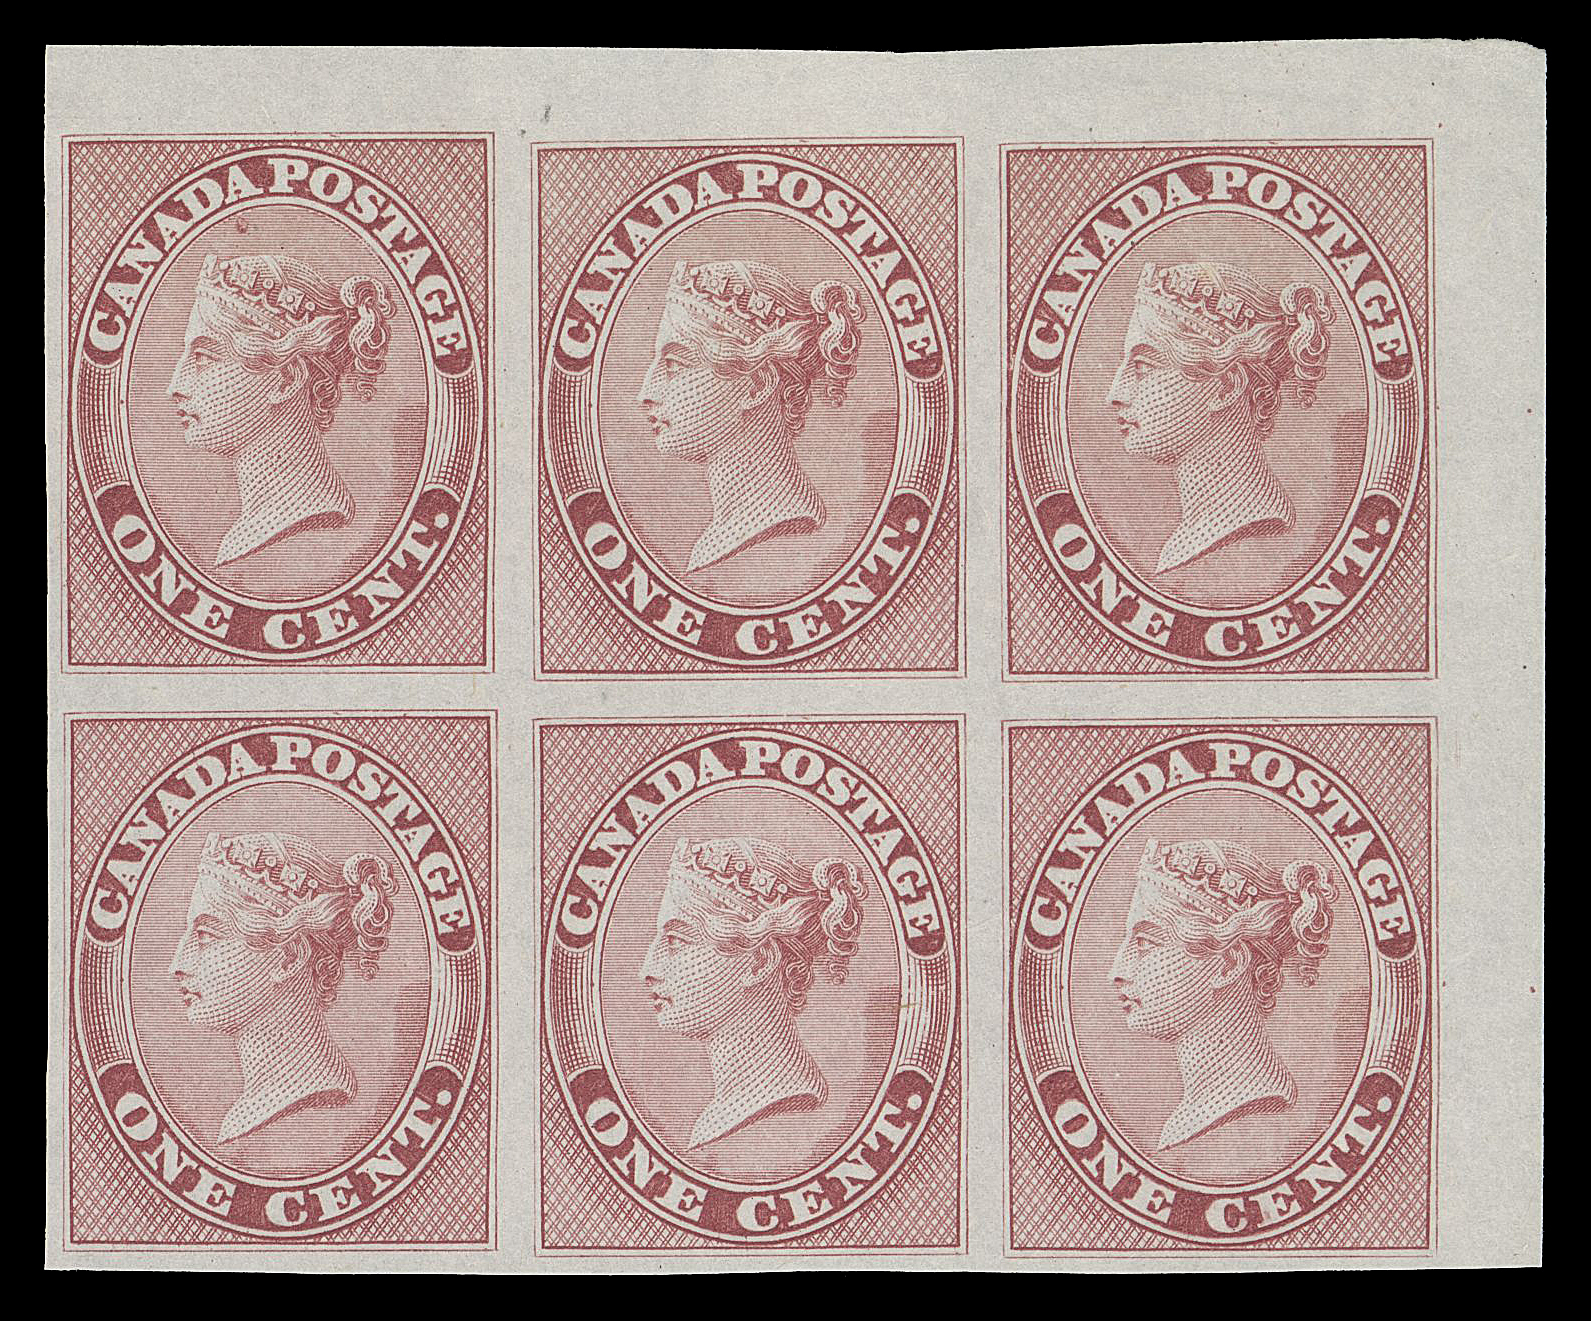 HALF PENNY AND ONE CENT  14TC,Trial colour corner margin plate proof block of six printed in pale rose, near issued colour, on india paper, choice, VF

Interestingly, this block lacks the ABNC imprint above Positions 8 & 9, indicating that it originated from a plate printed prior to October 1864. Imprints were added starting with the printing order of November 1864.